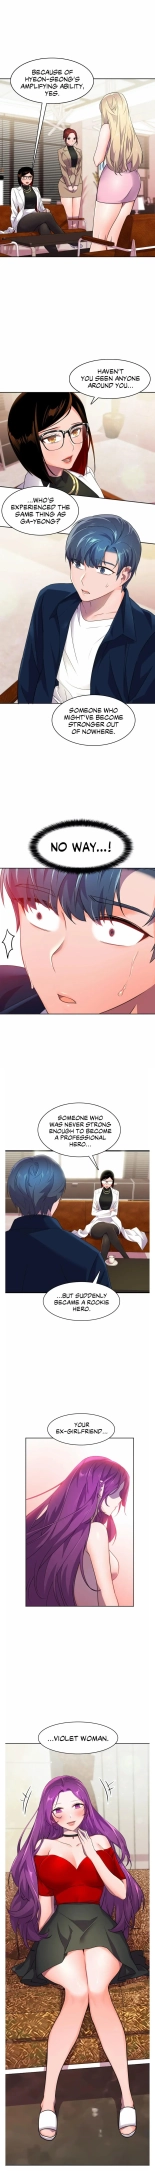 HERO MANAGER Ch. 10 : page 8